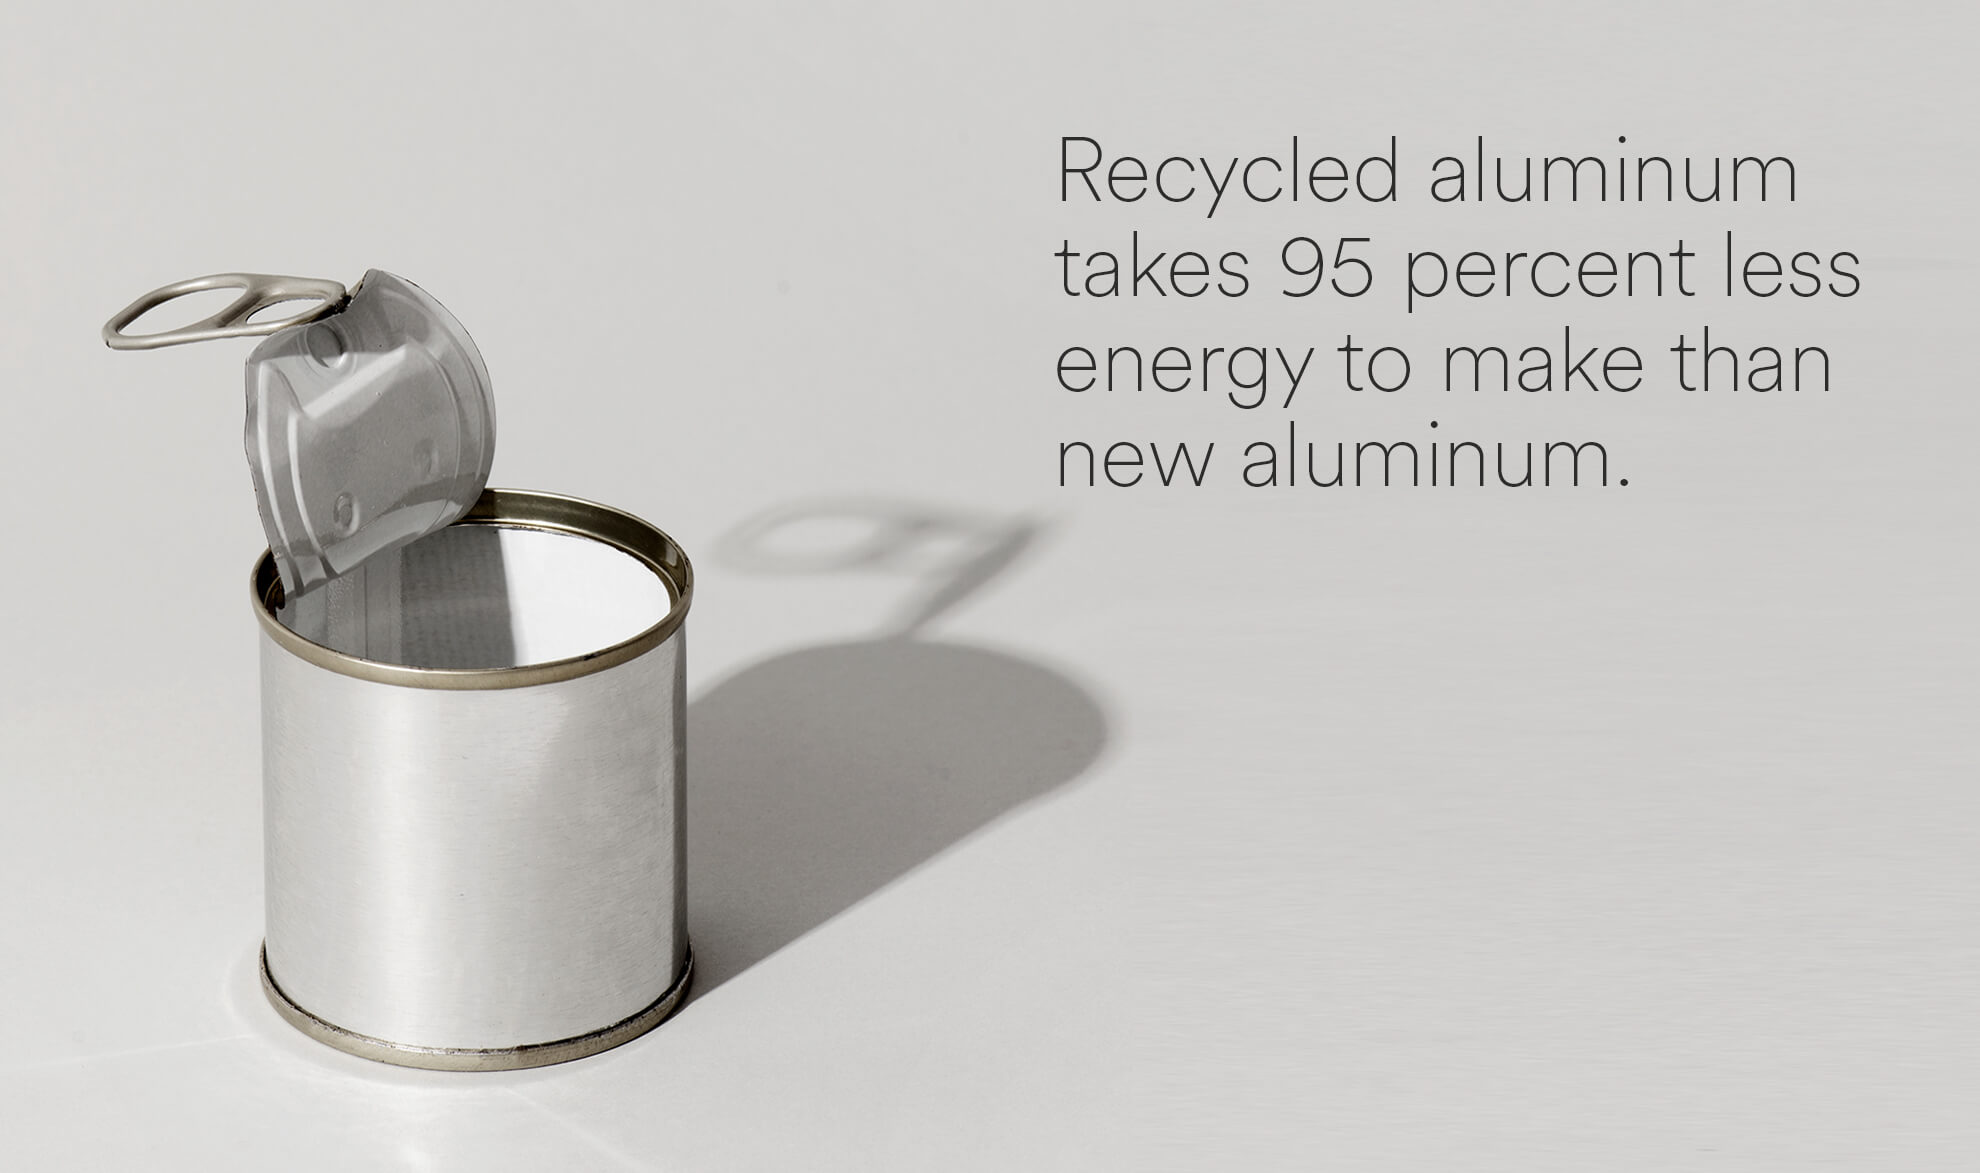 Recycled aluminum takes 95 percent less energy